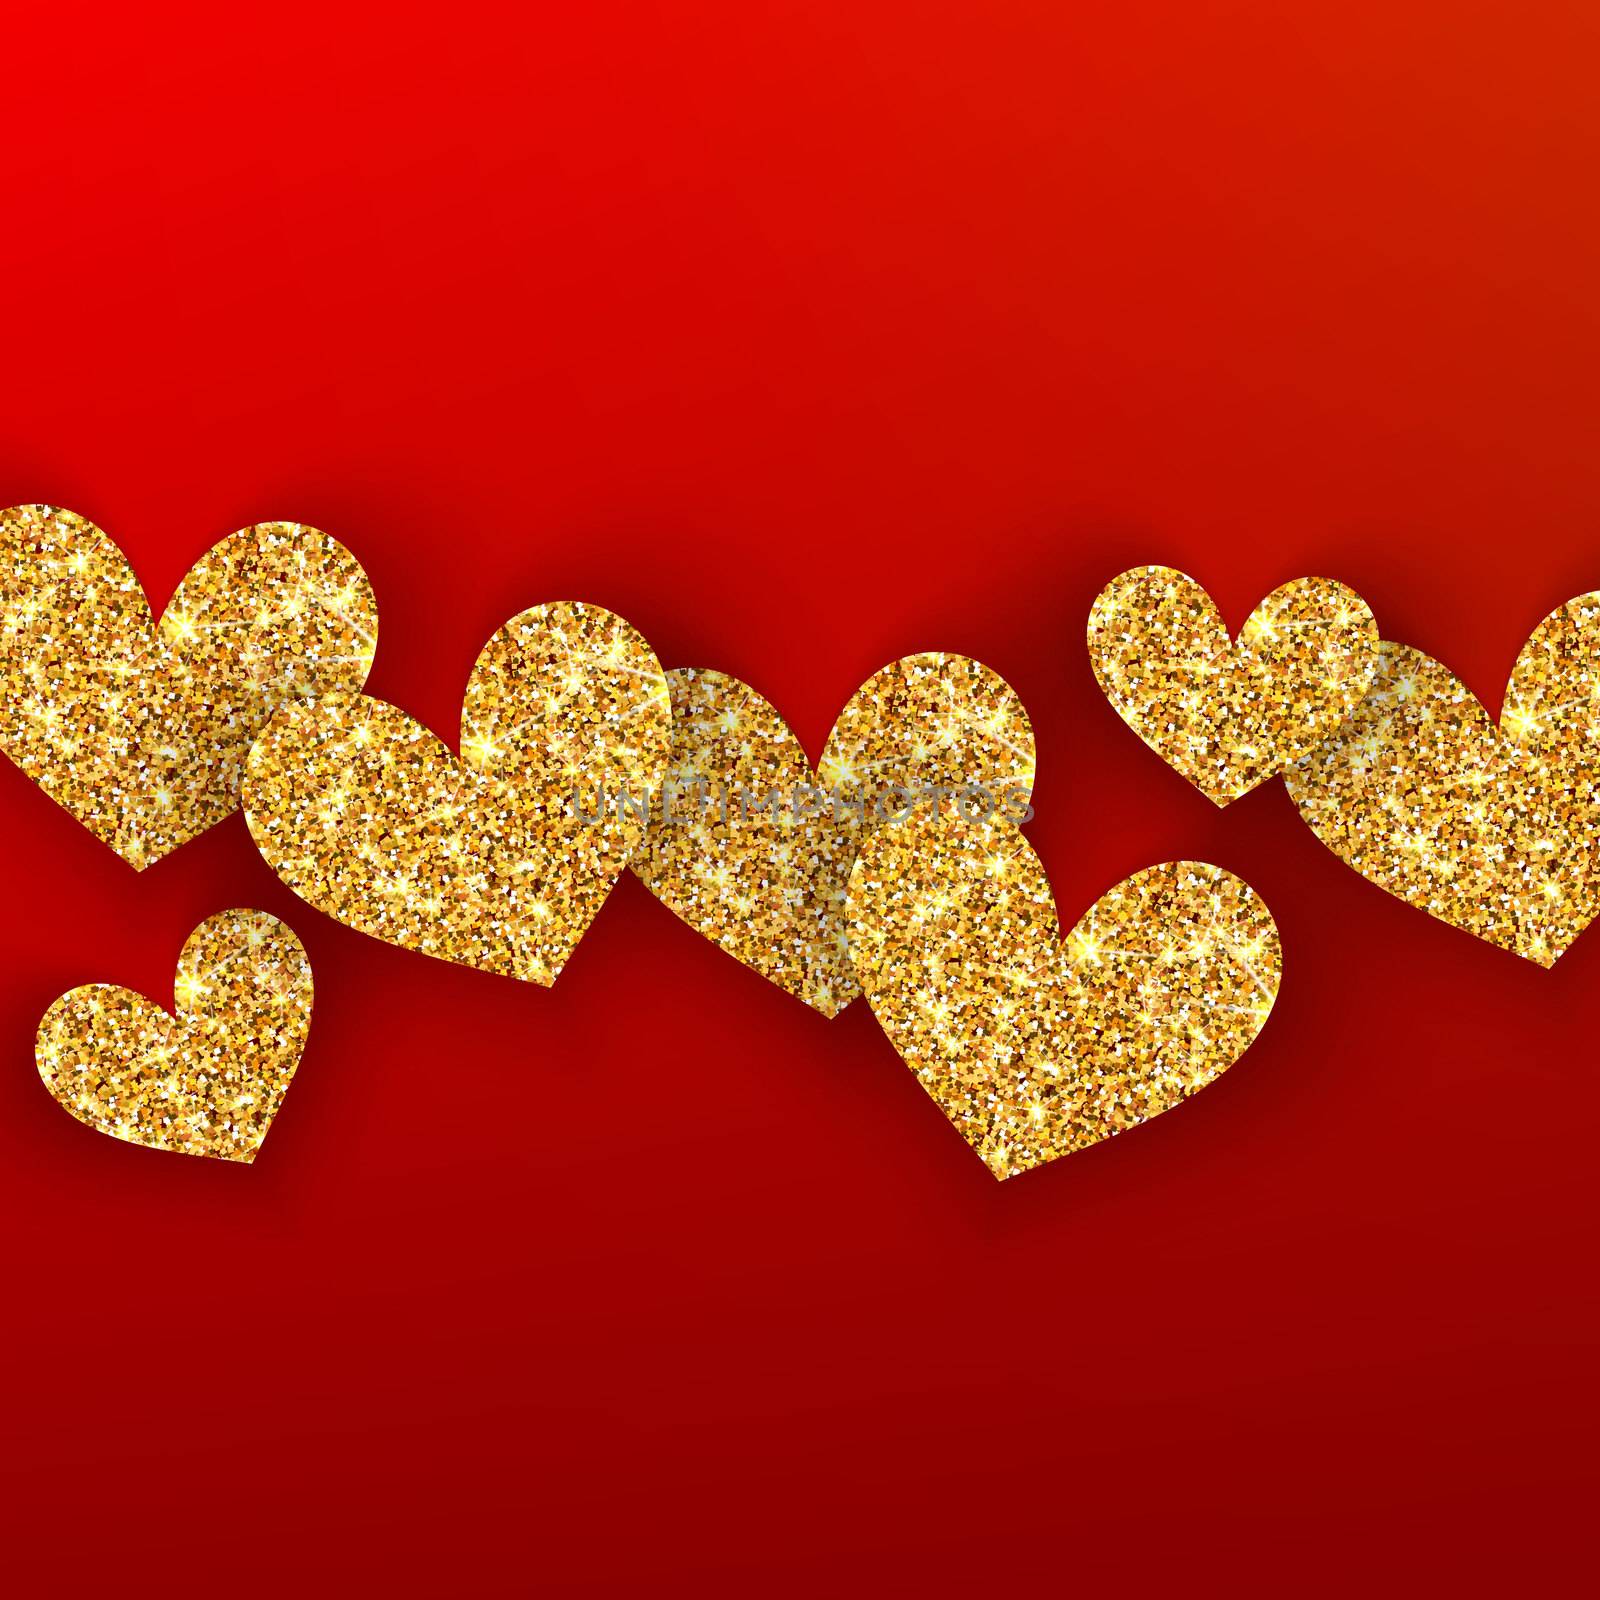 Realistic golden hearts on red background. Happy Valentines Day concept for greating card. Romantic Valentine gold hearts. Weeding design elements